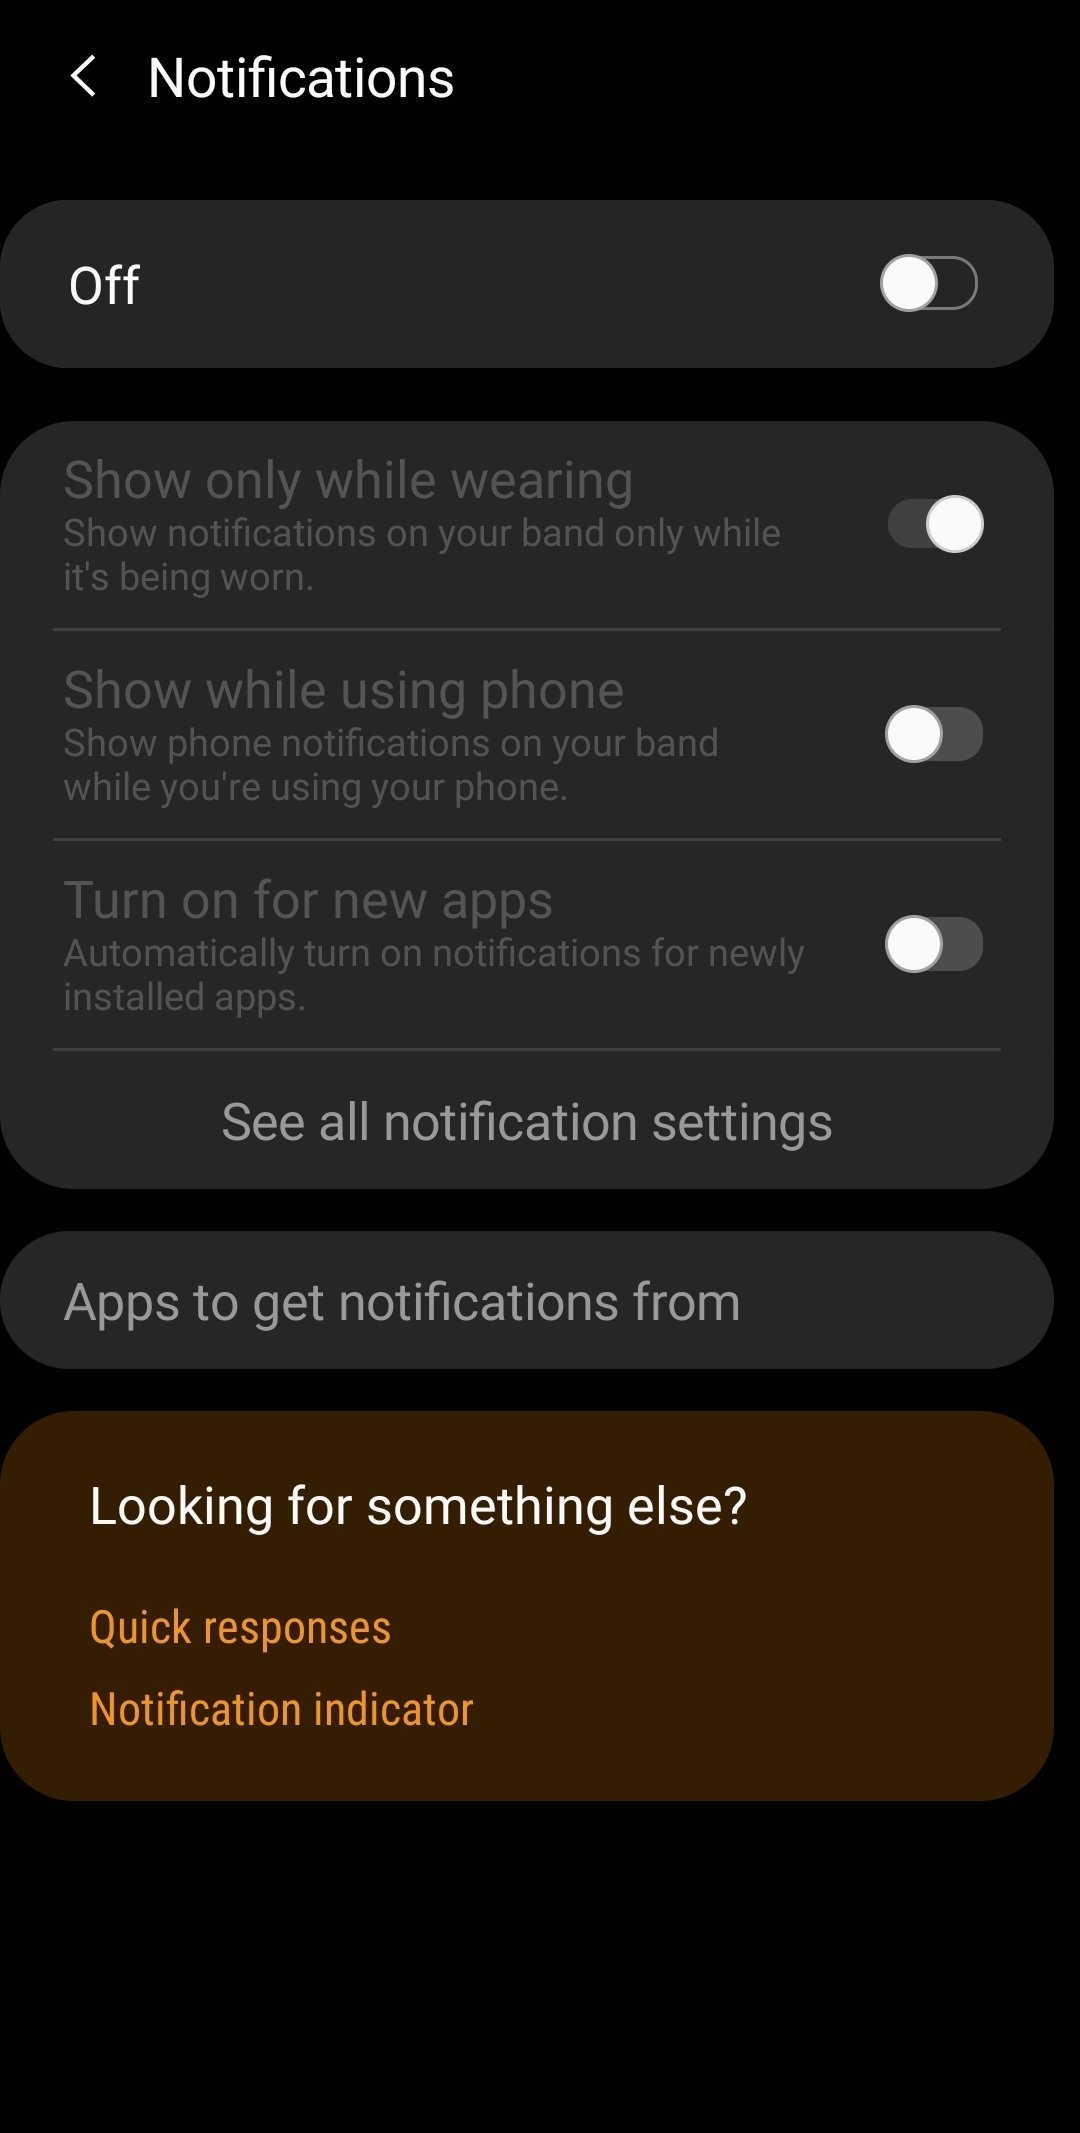 Notifications on Galaxy Fit 2